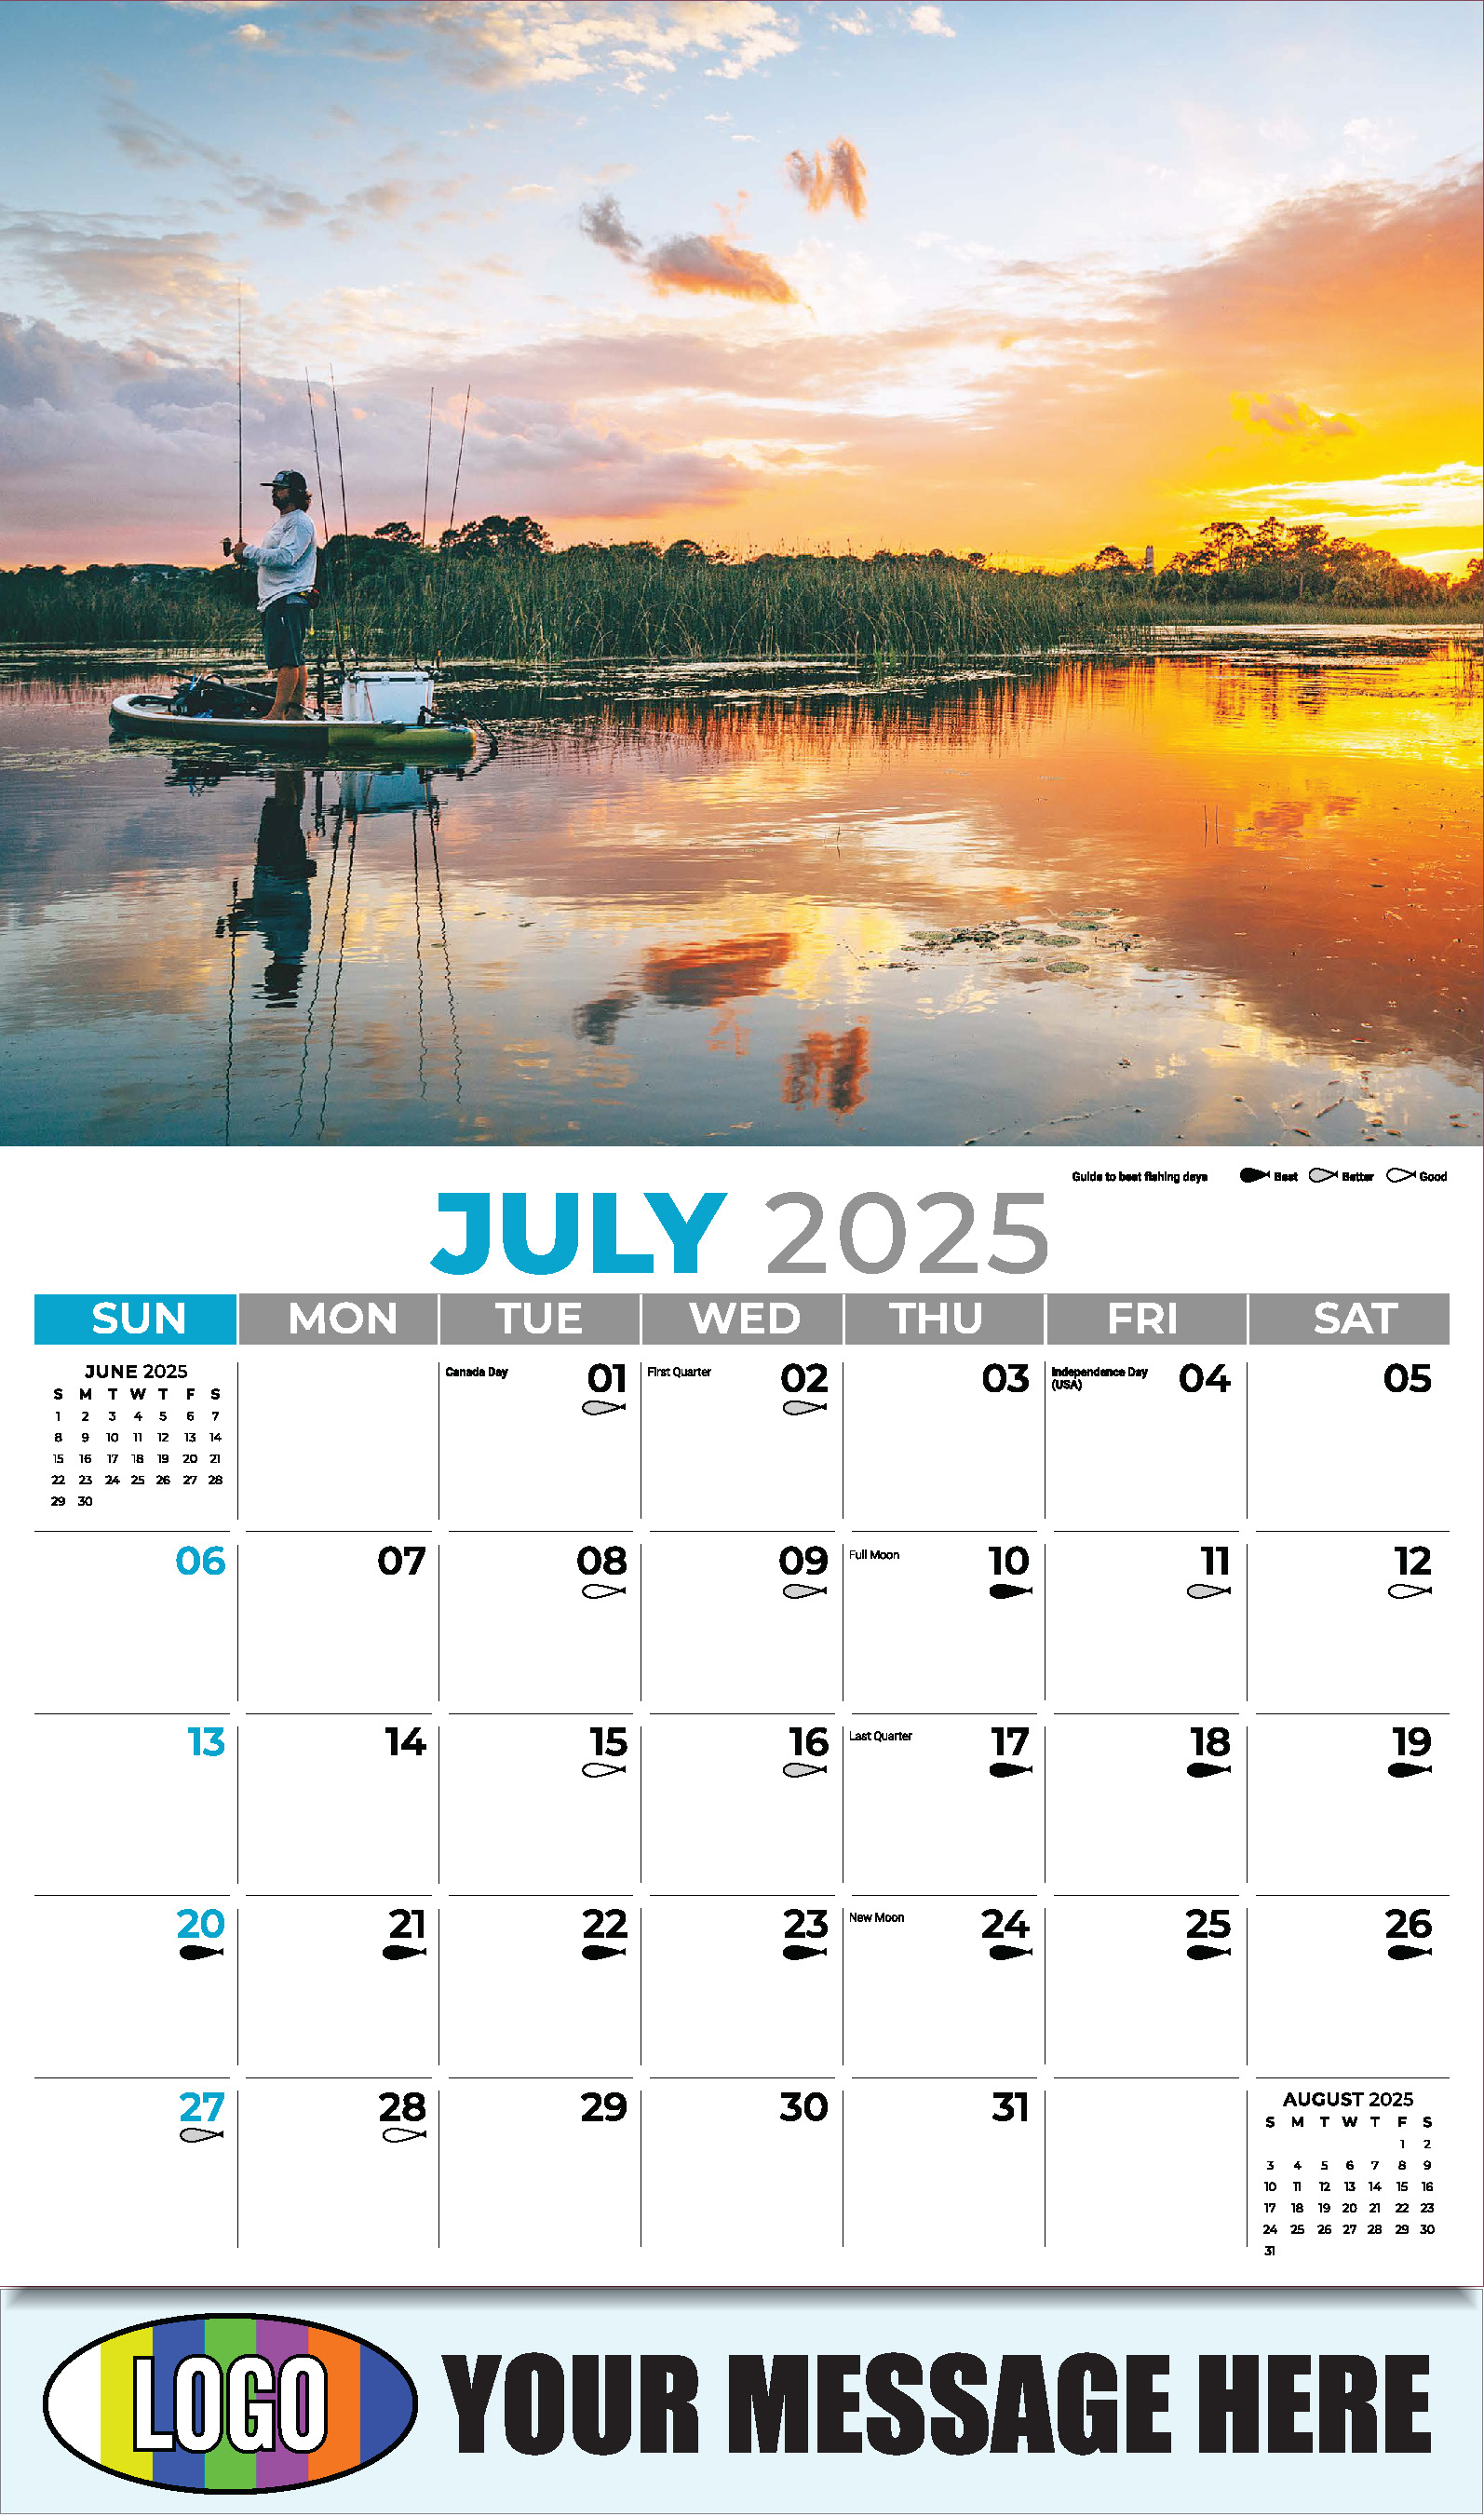 Fishing and Hunting 2025 Business Promotion Calendar - July